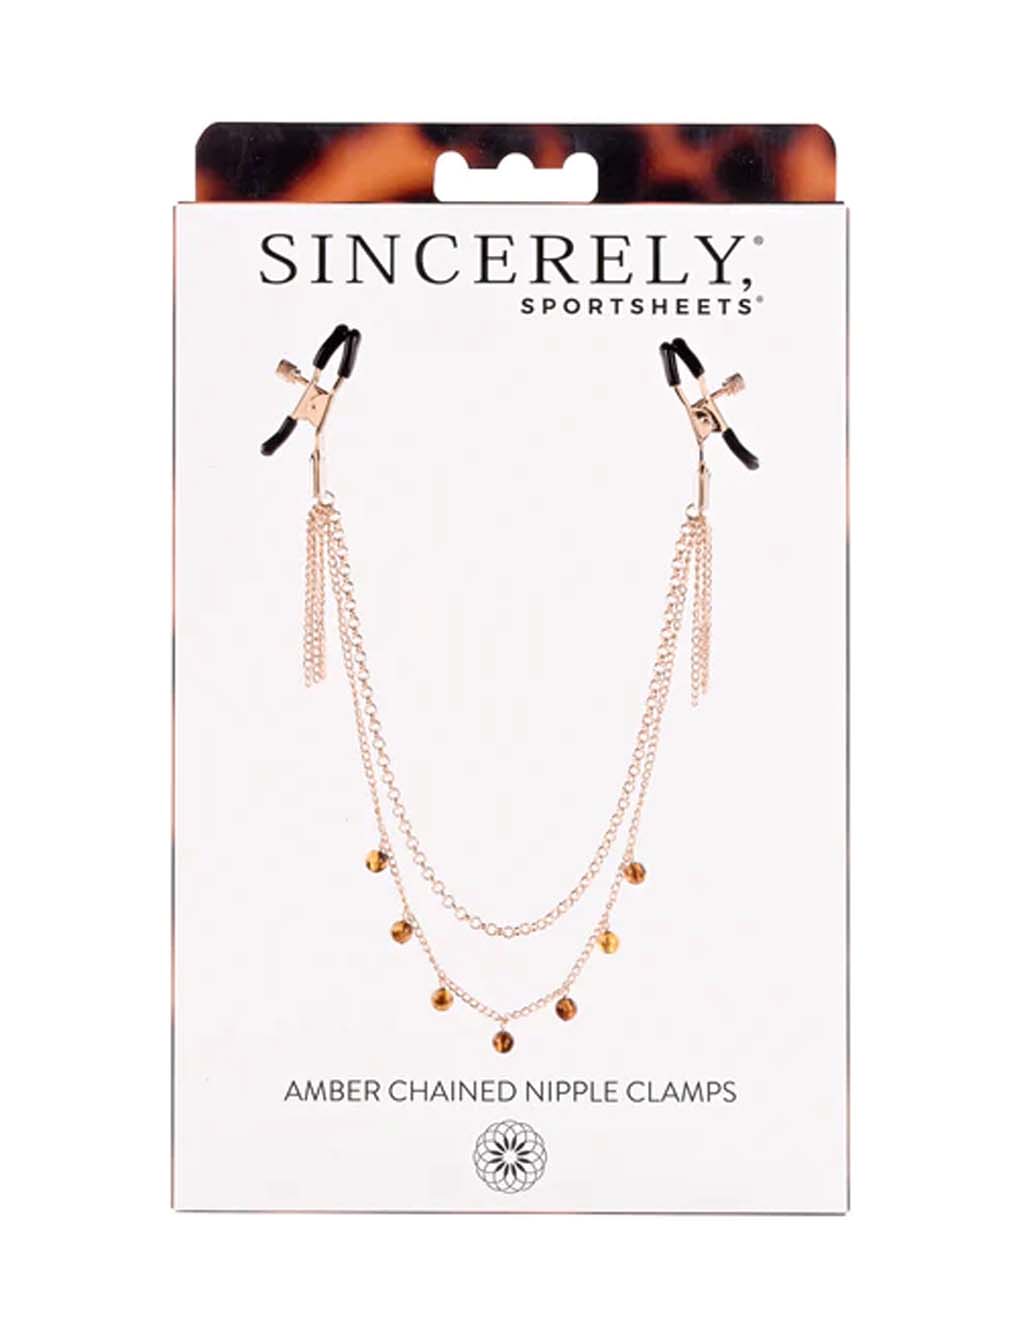 Sincerely, Sportsheets Amber Chained Nipple Clamps- box